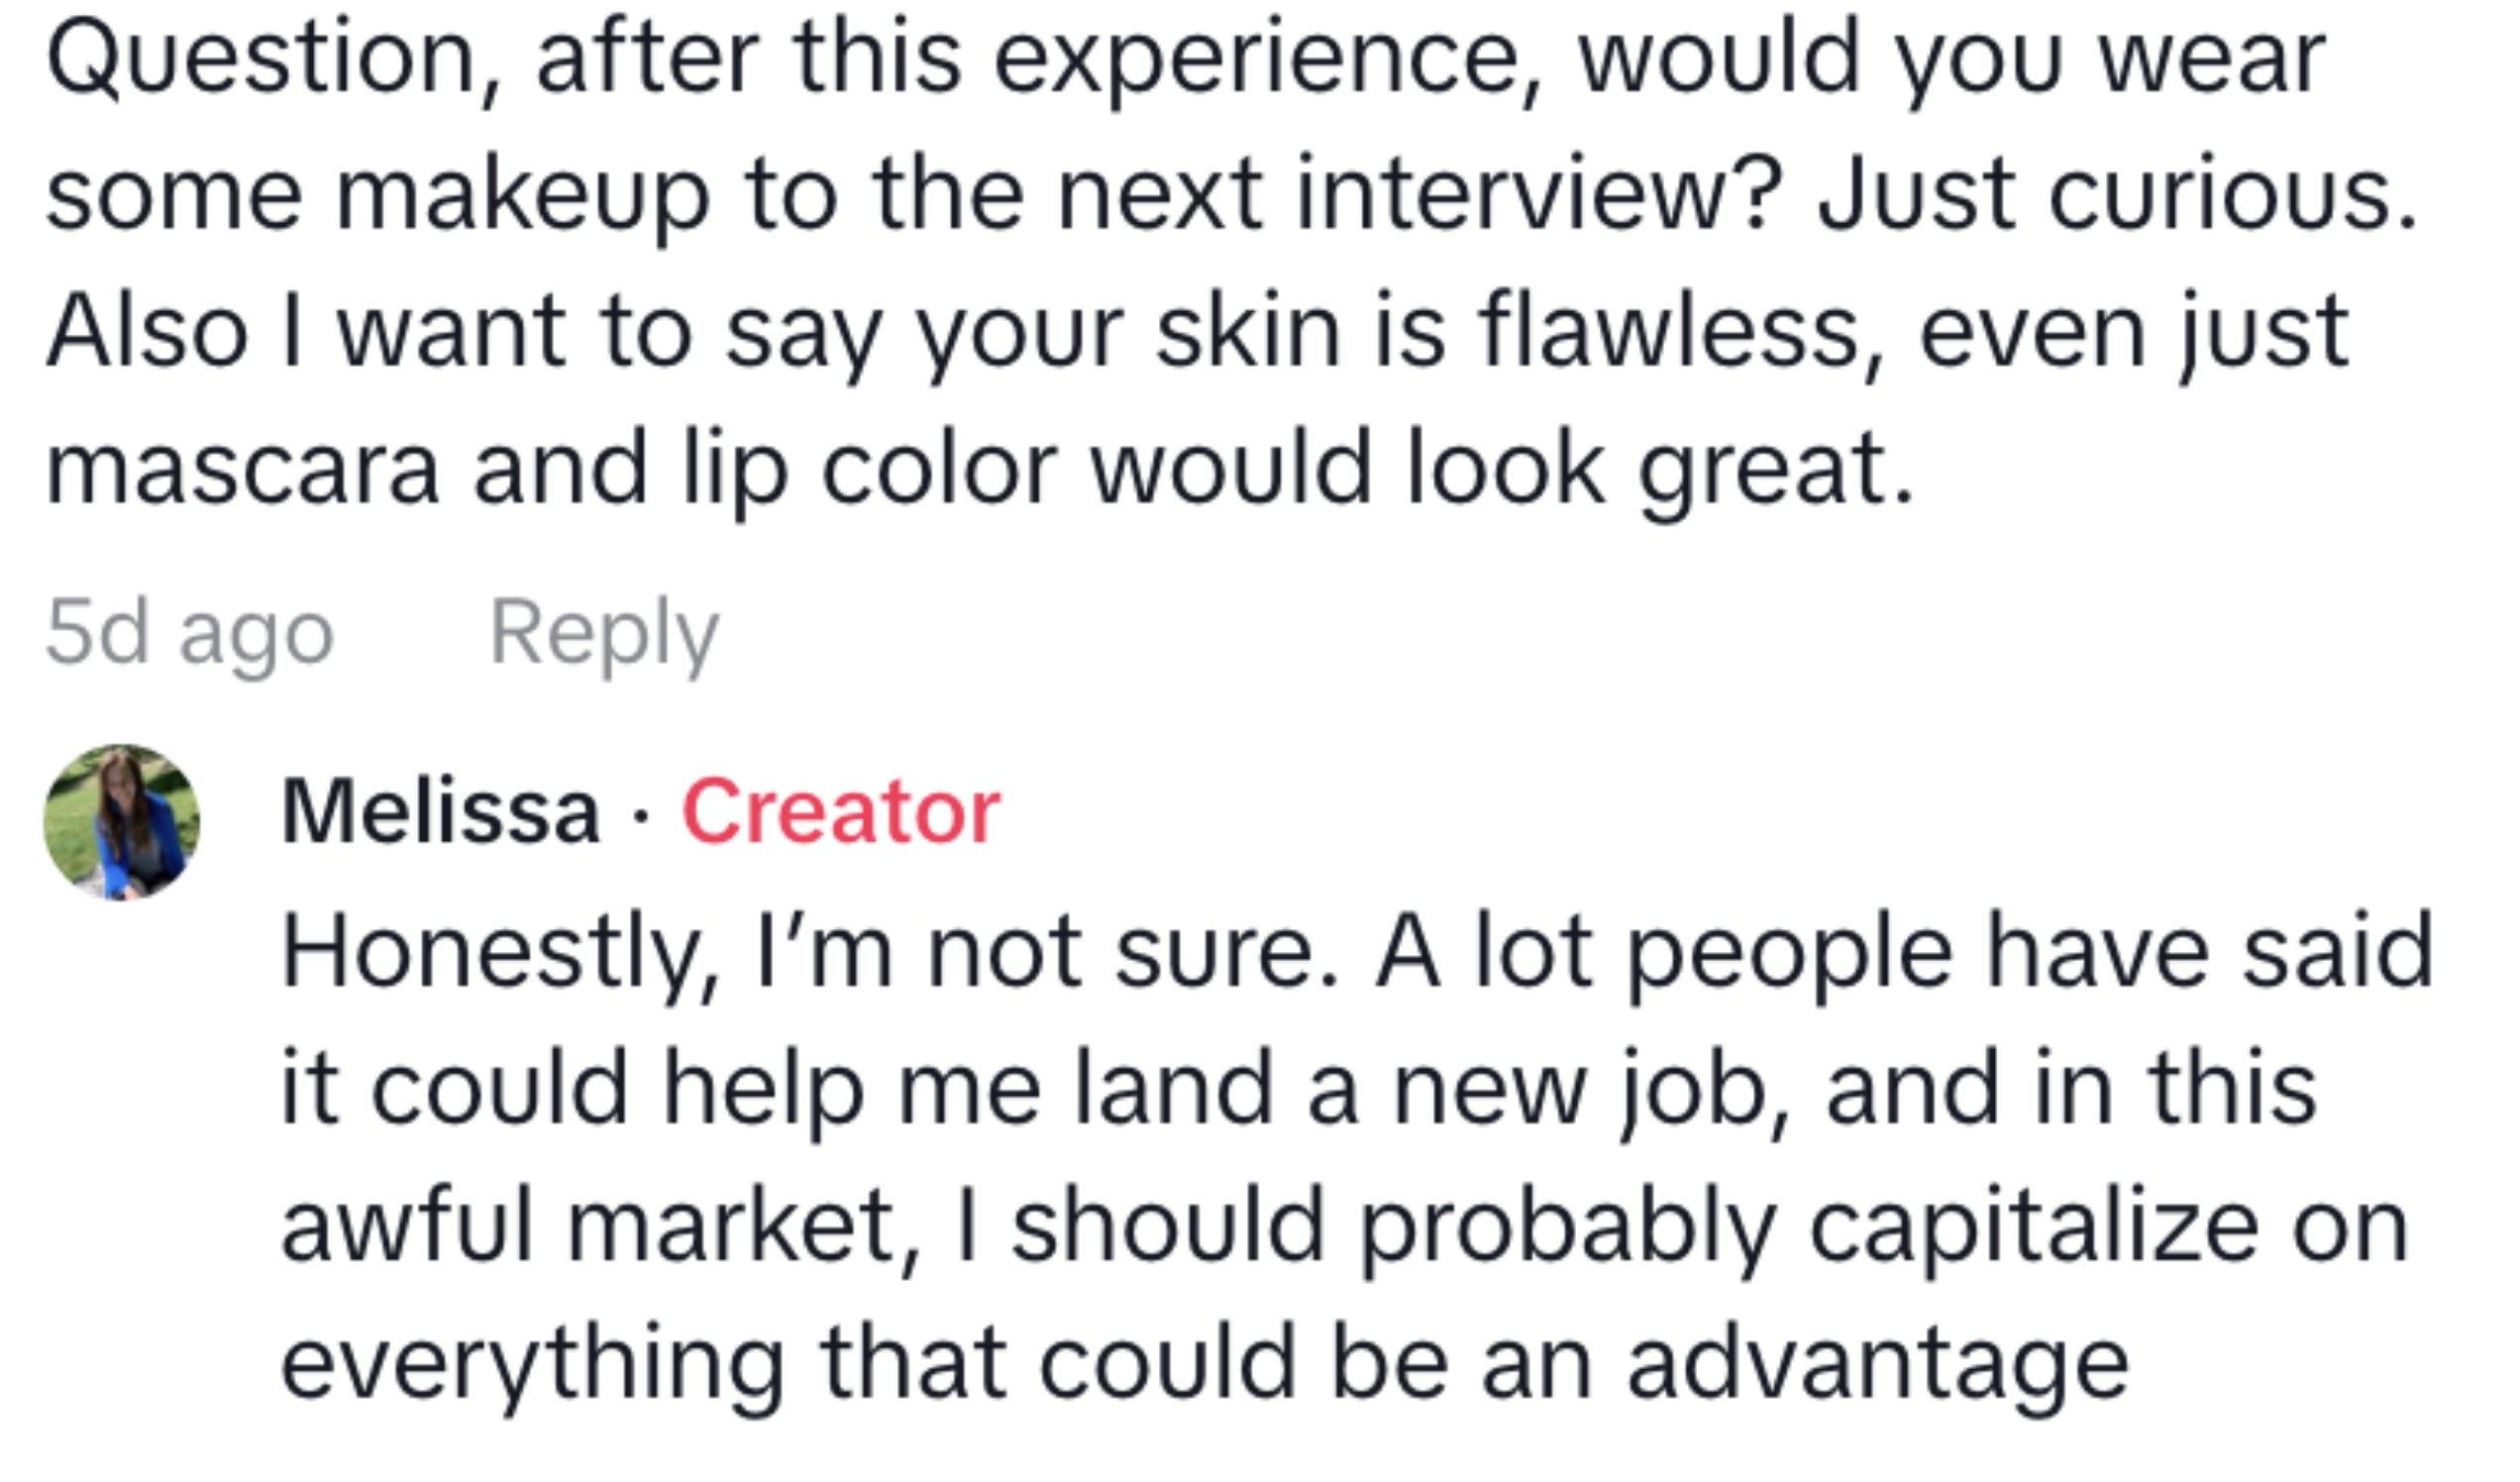 The image shows two comments in a social media thread discussing the use of makeup for job interviews